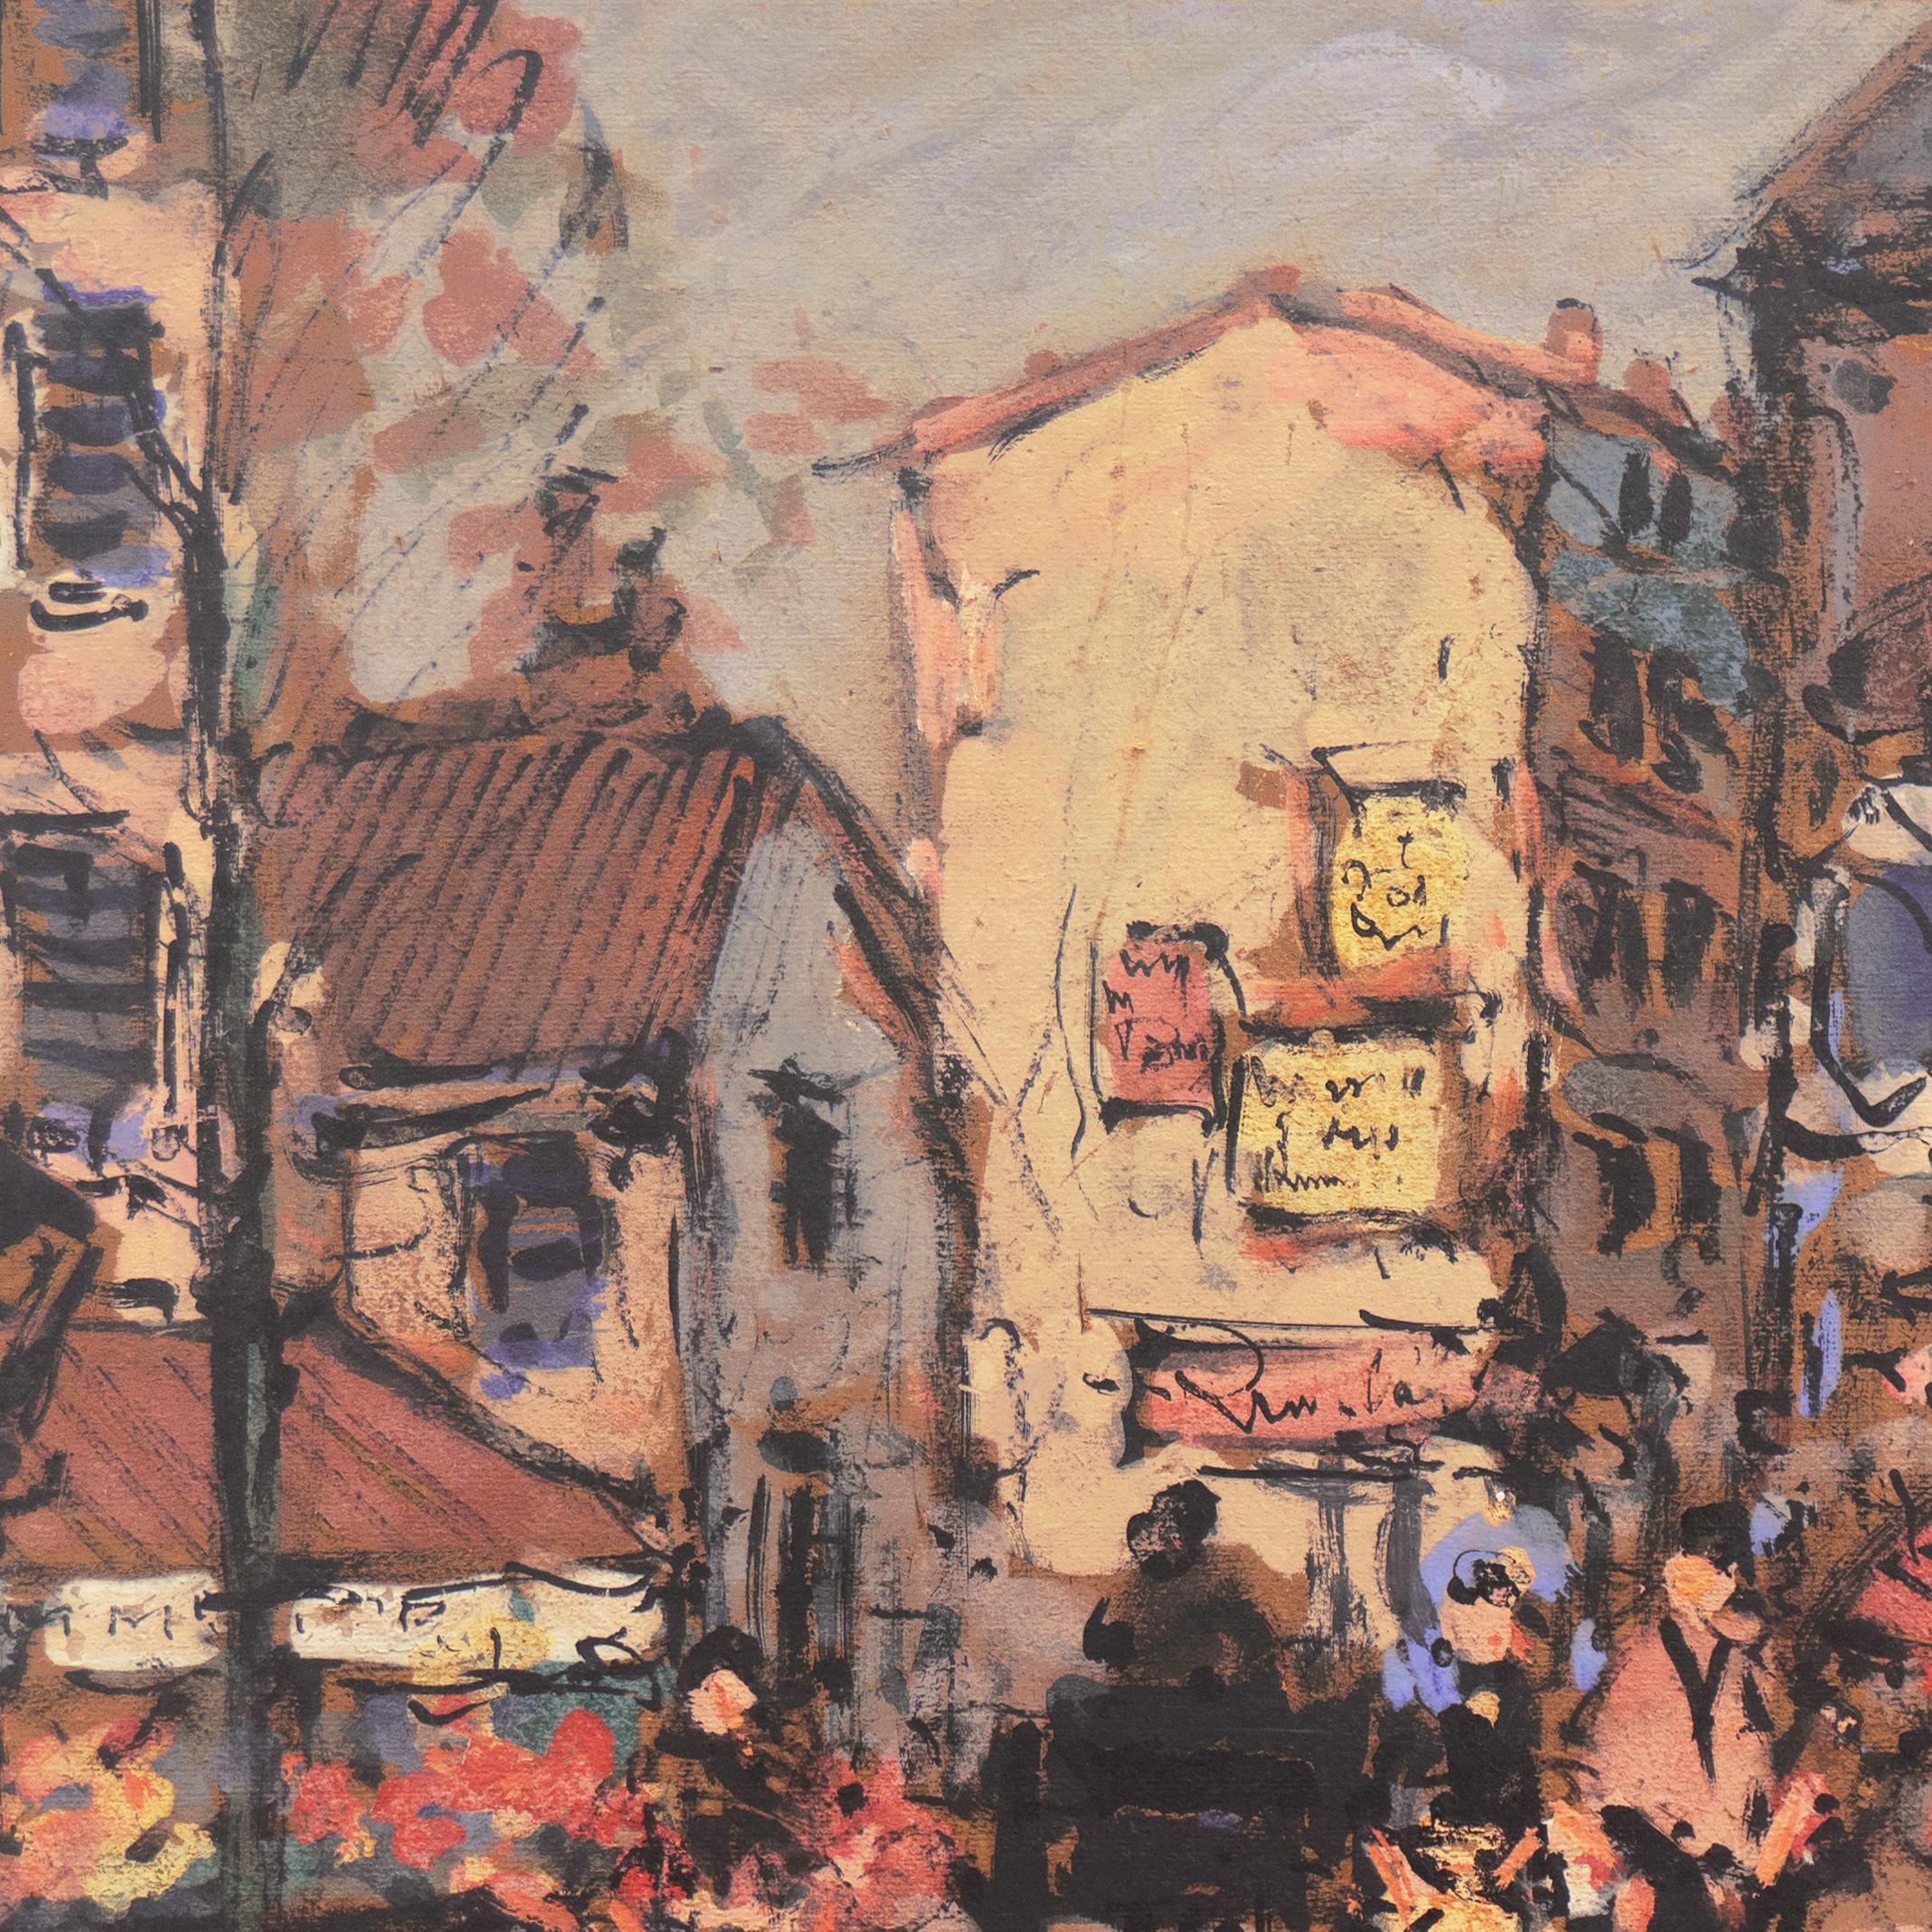 A large and dynamic, Post-Impressionist cityscape showing a view of a picturesque Parisian street. In the foreground,  a flower seller offers bouquets to fashionably-dressed pedestrians walking by a busy cafe where patrons are seated beneath striped